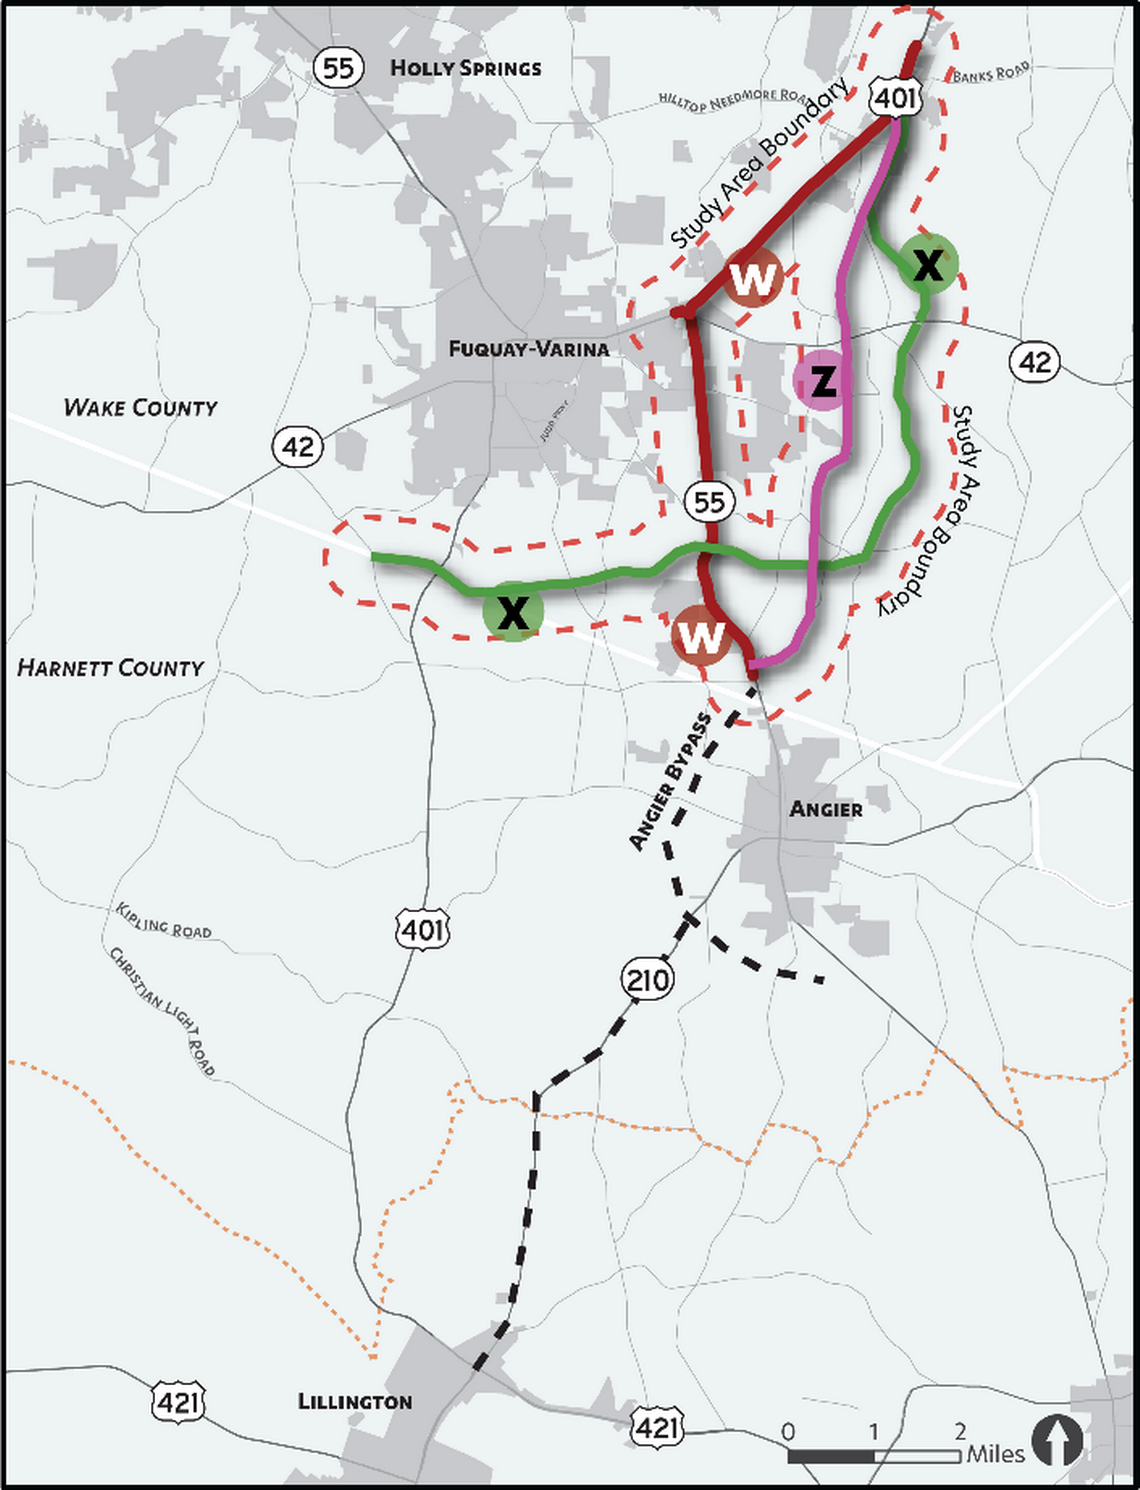 The Capital Area Metropolitan Planning Organization has developed three options for bypassing U.S. 401 traffic around Fuquay-Varina in southern Wake County. Option W would involve improving existing U.S. 401 and N.C. 55, while the other two options are new highways.